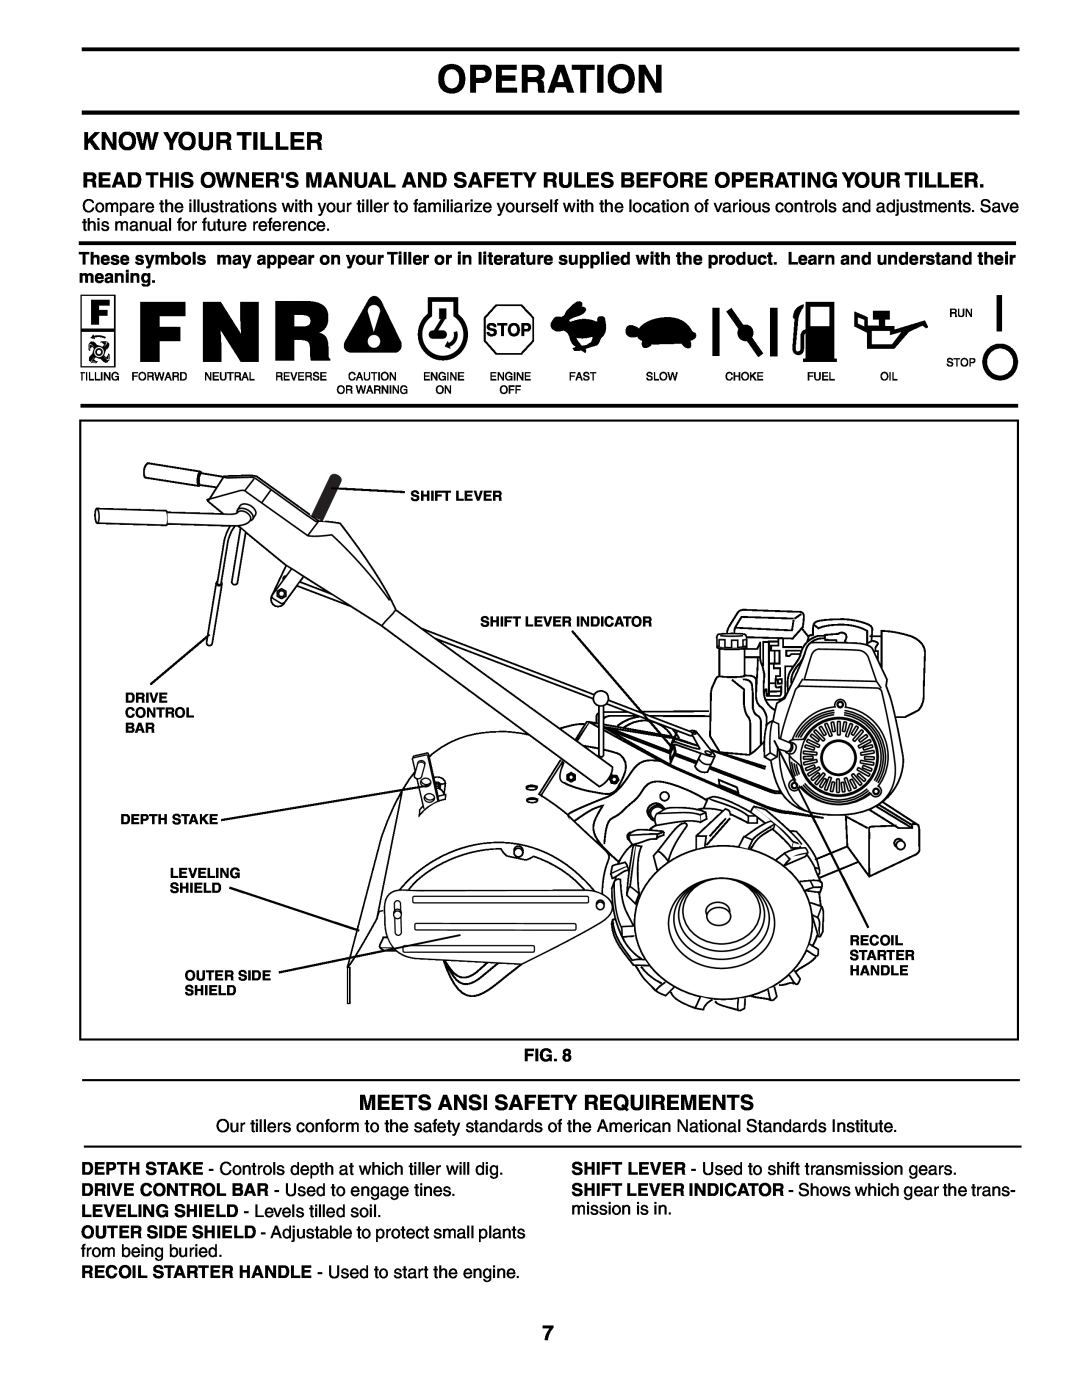 Husqvarna 500RTTA Operation, Know Your Tiller, Read This Owners Manual And Safety Rules Before Operating Your Tiller 